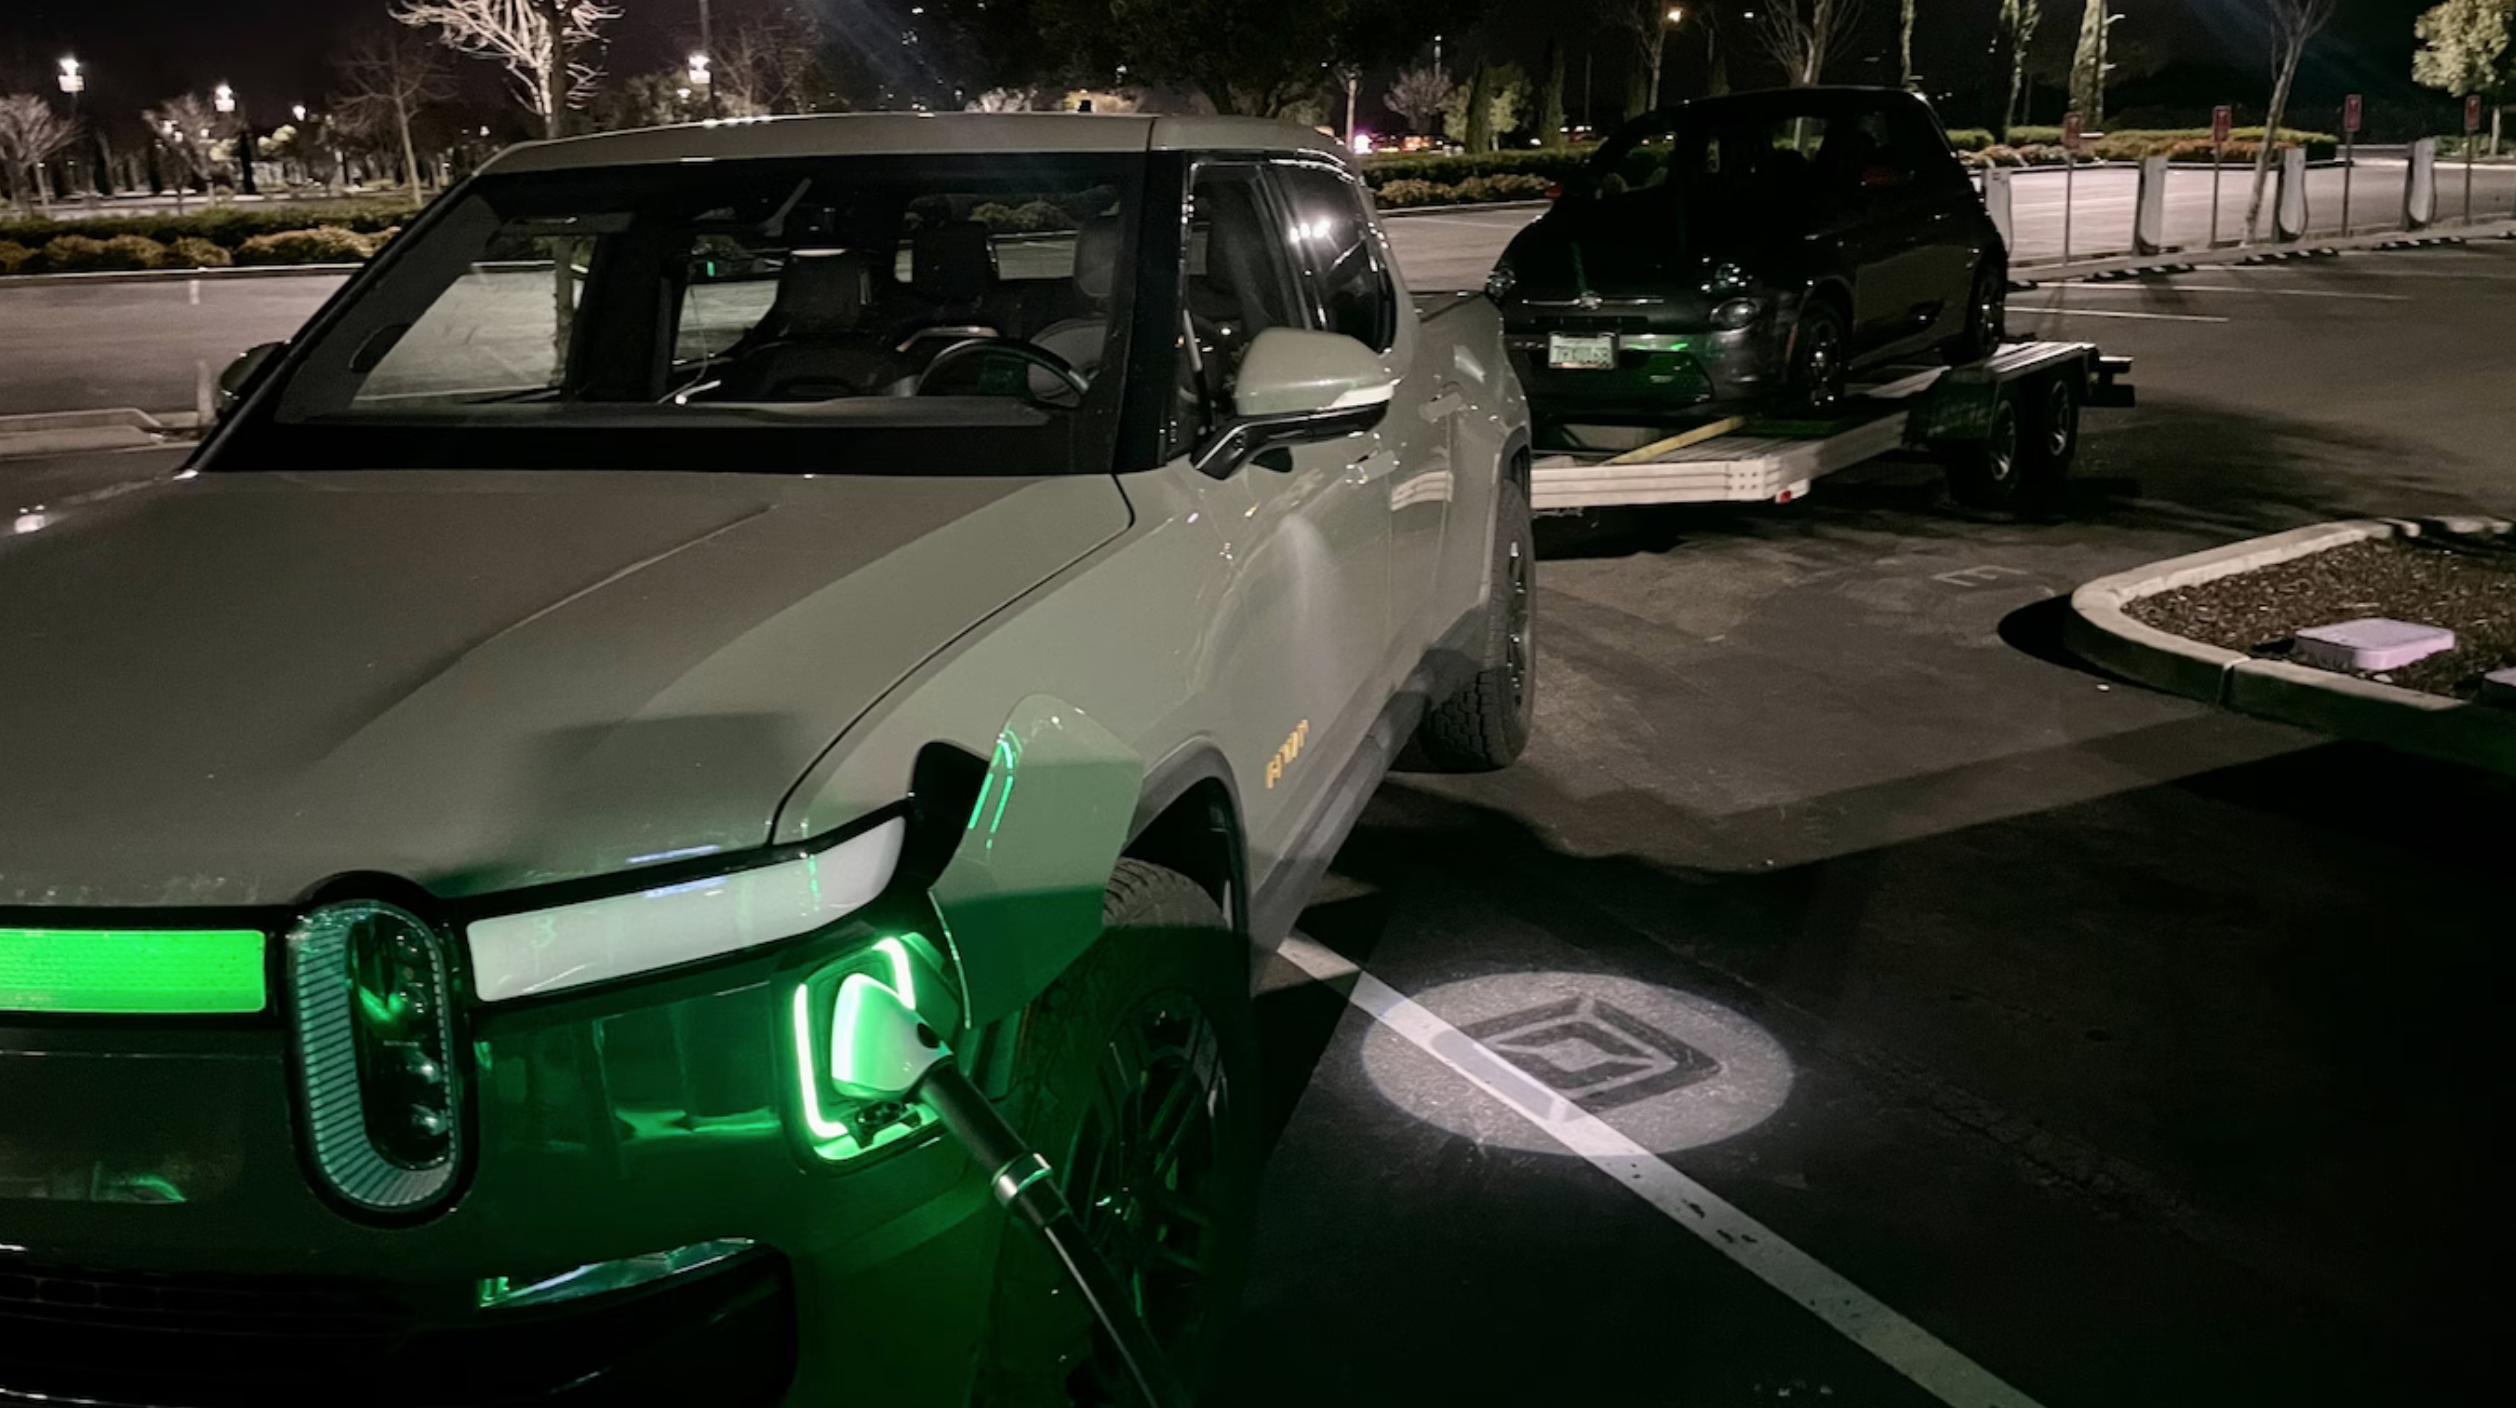 The Rivian R1T charging while towing the Fiat 500e